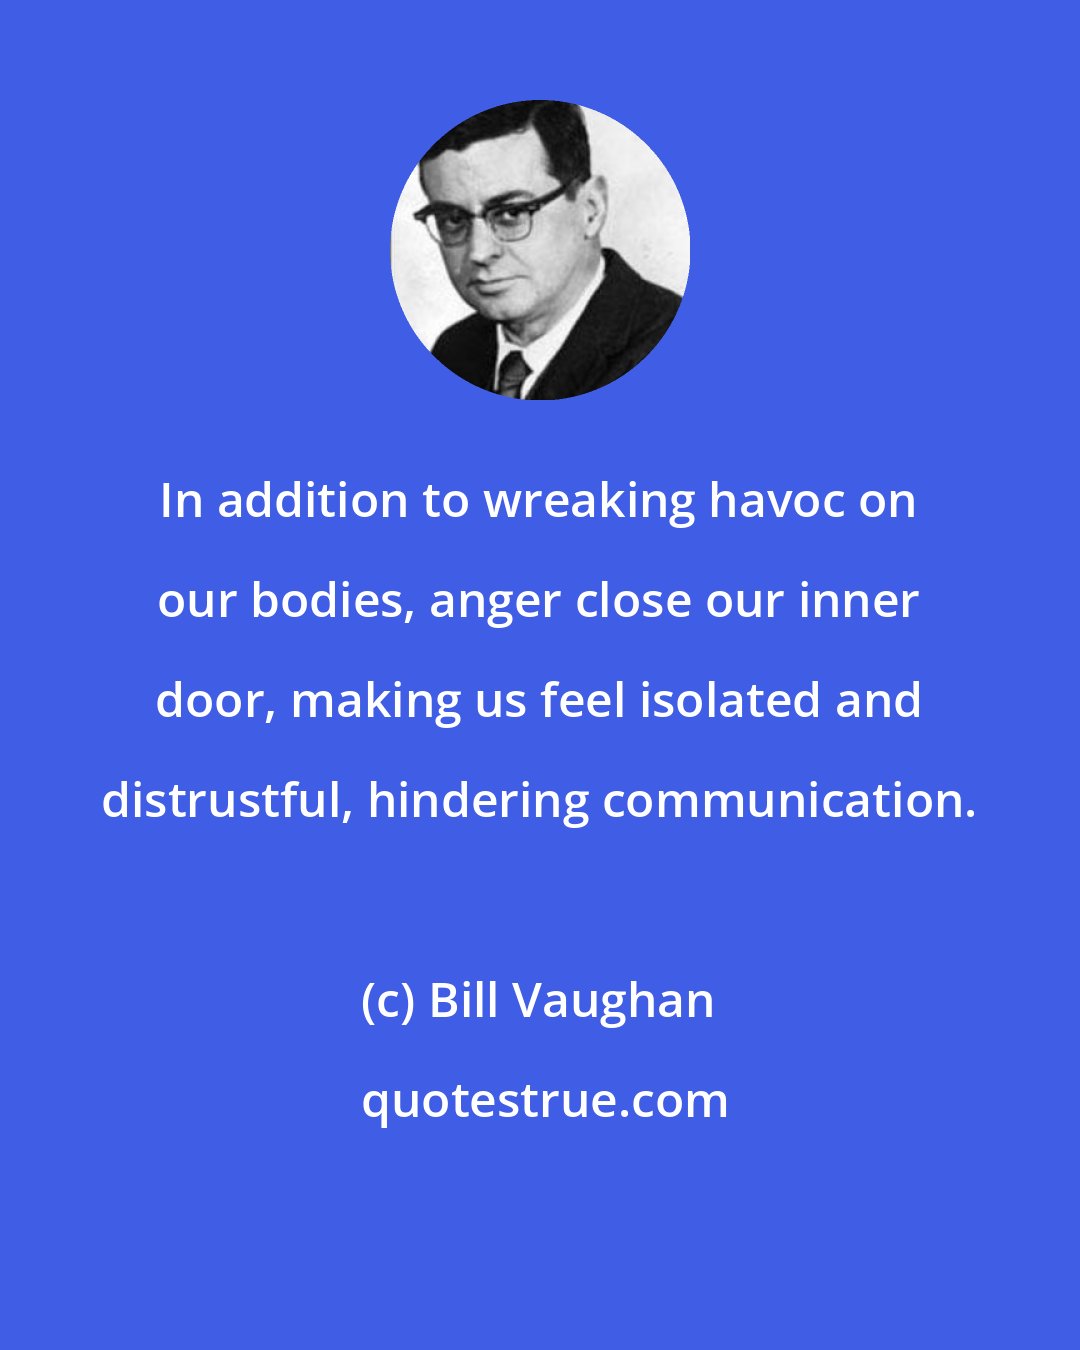 Bill Vaughan: In addition to wreaking havoc on our bodies, anger close our inner door, making us feel isolated and distrustful, hindering communication.